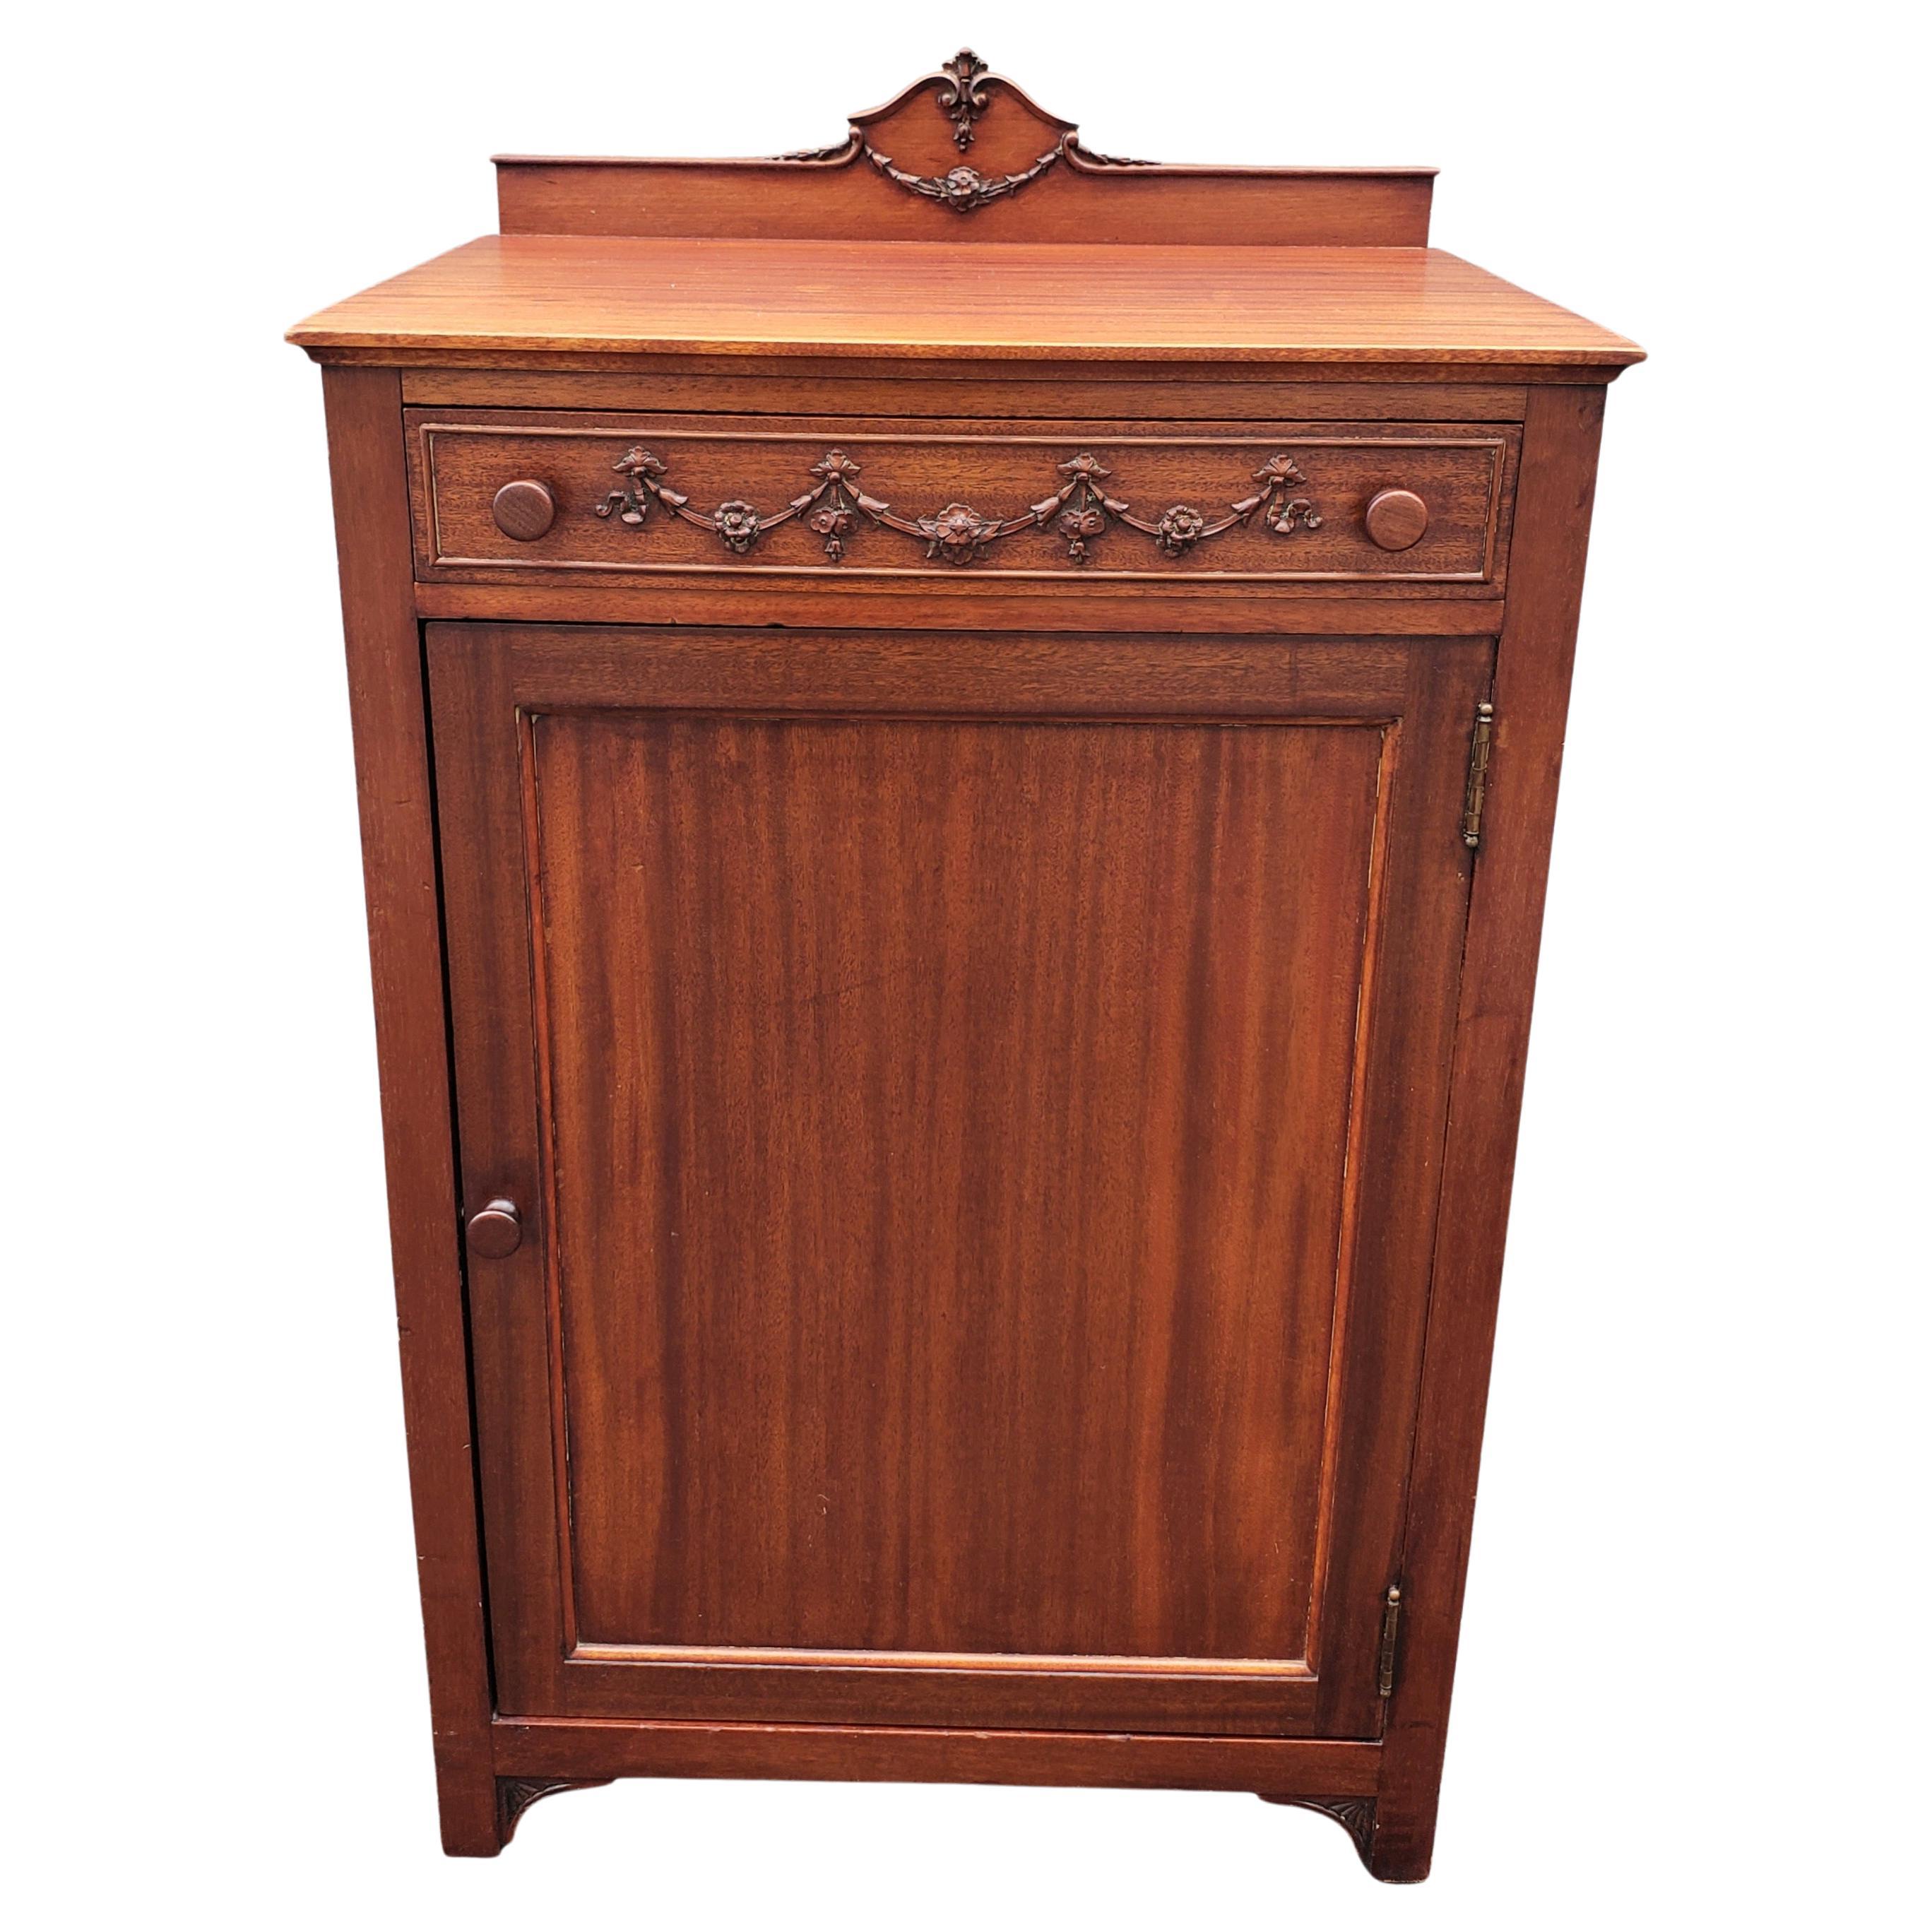 19th Century Robert J. Horner and Co. Solid Carved Mahogany Sheet Music Cabinet For Sale